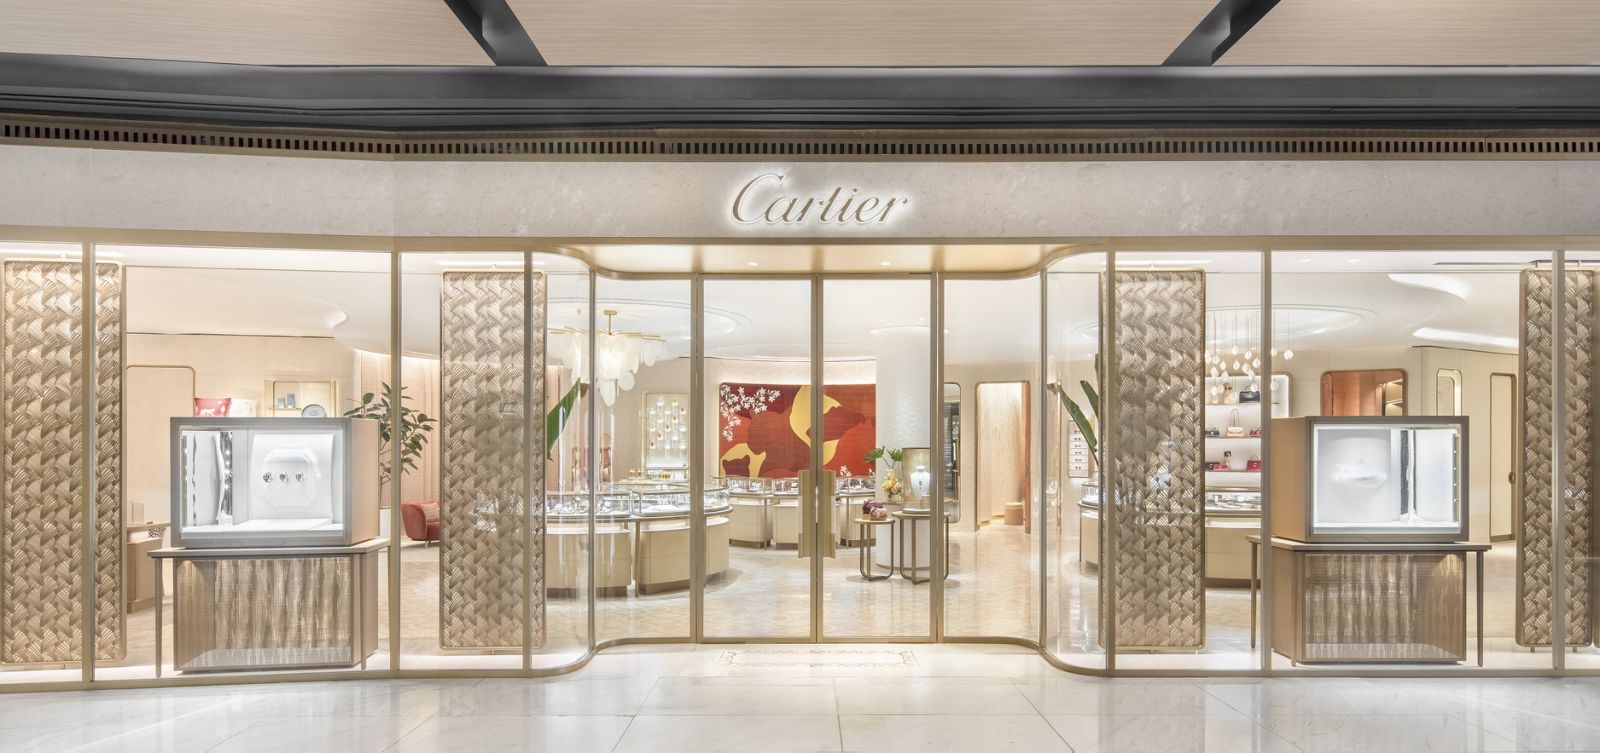 Cartier opens new, refreshed boutique at Greenbelt 3